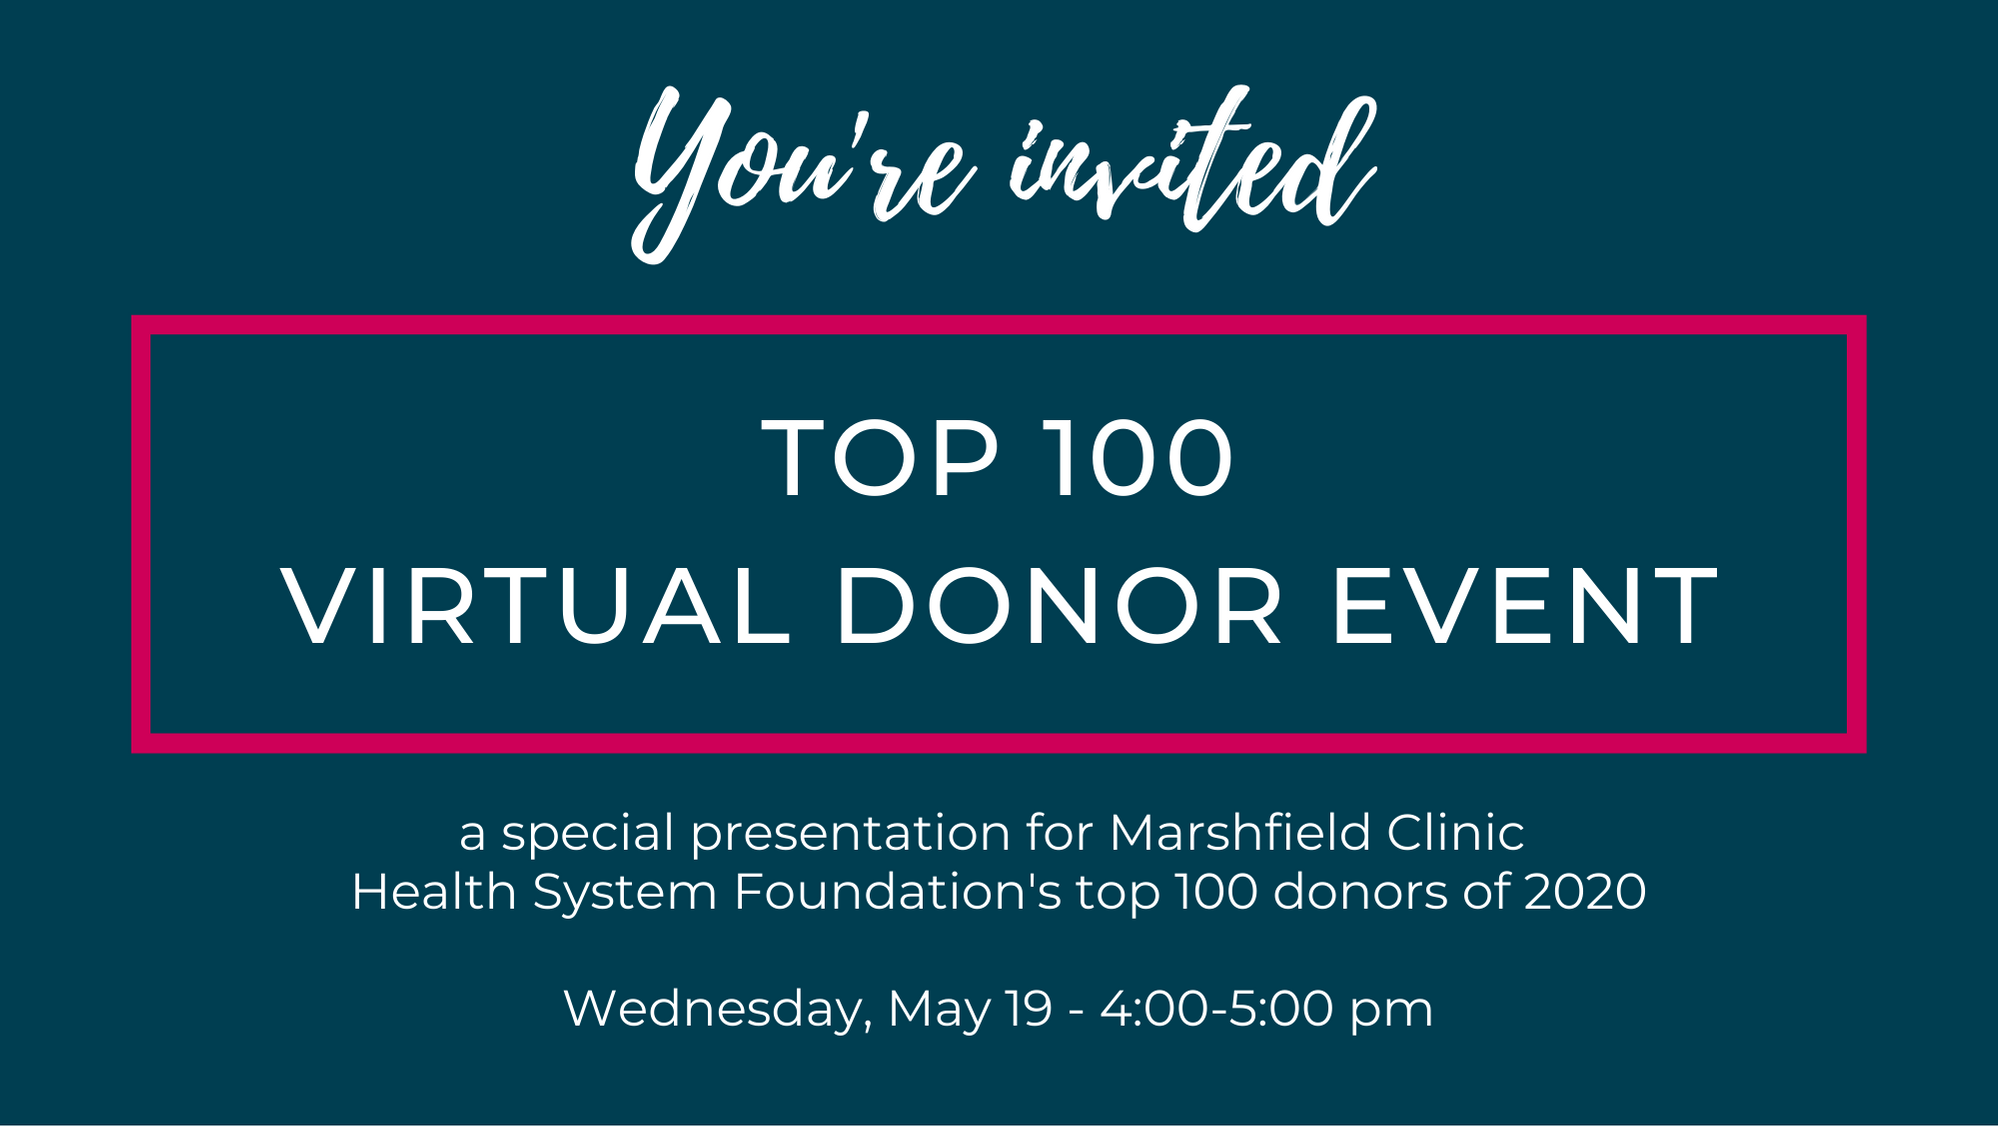 Top 100 virtual donor event